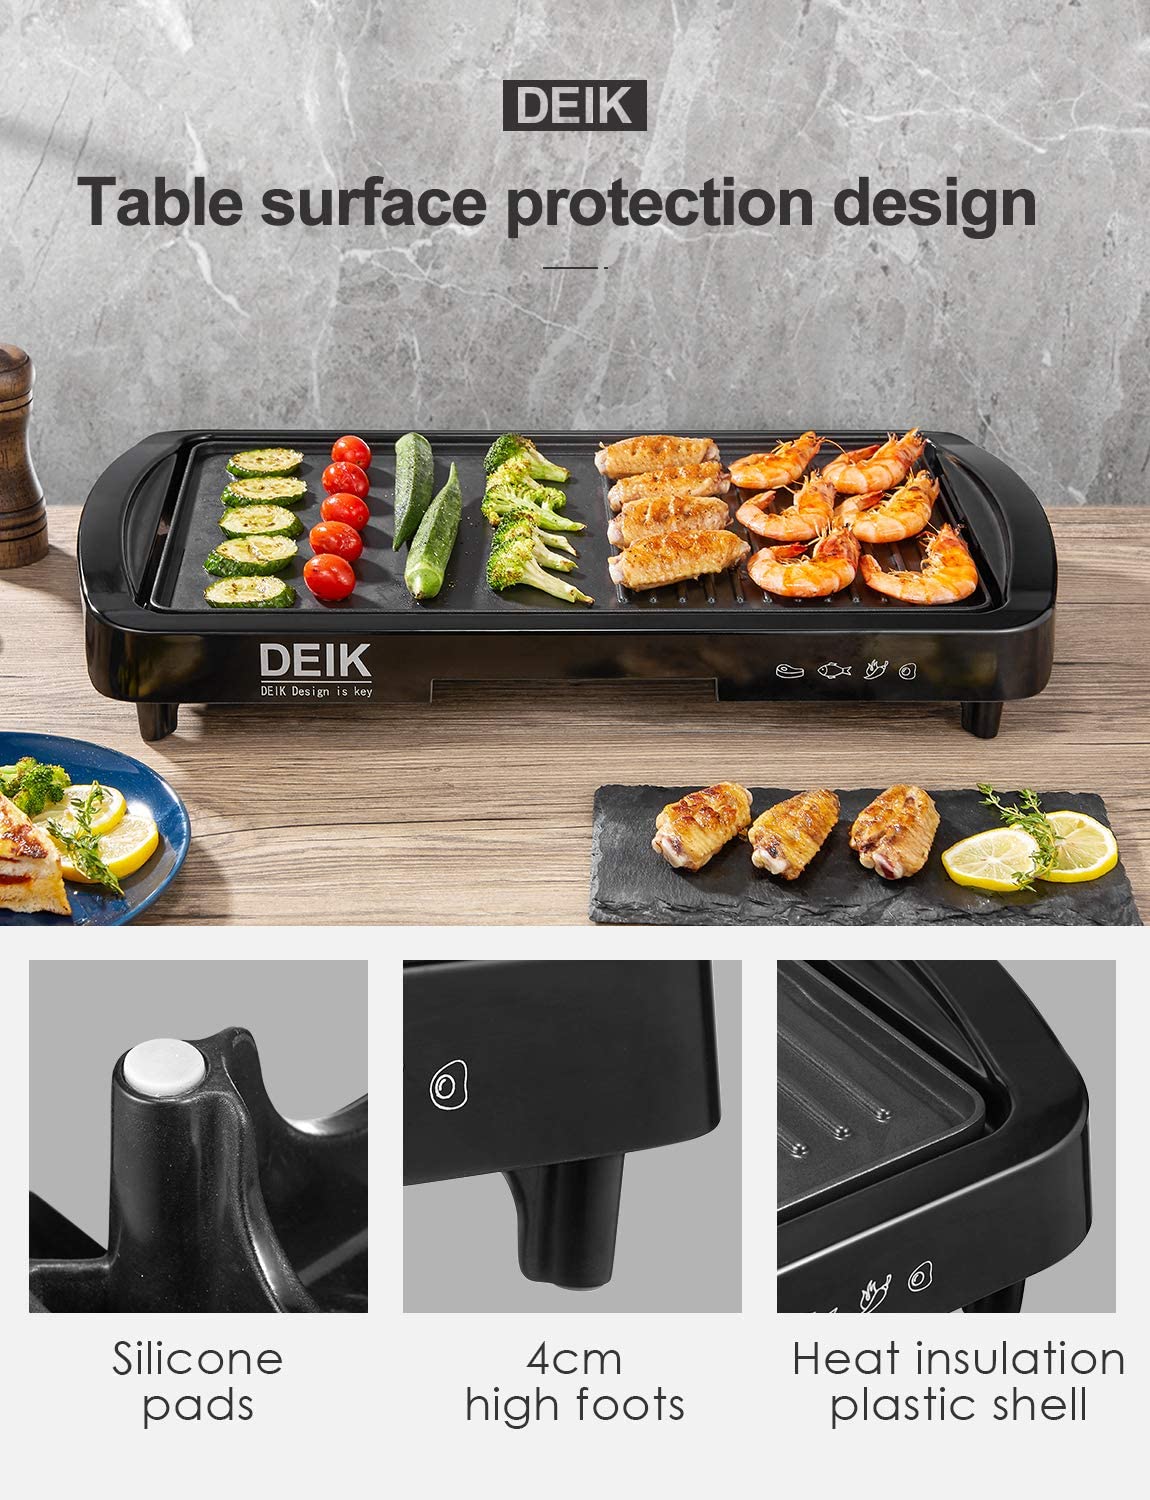 Deik | Electric Griddle, Nonstick 1600W Pancake Griddle, Smokeless Coated Griddle Pan with 5-Level Control with Adjustable Temperature & Oil Drip Tray, Table Surface Protection Design, 11" x 21", Family Sized, Black